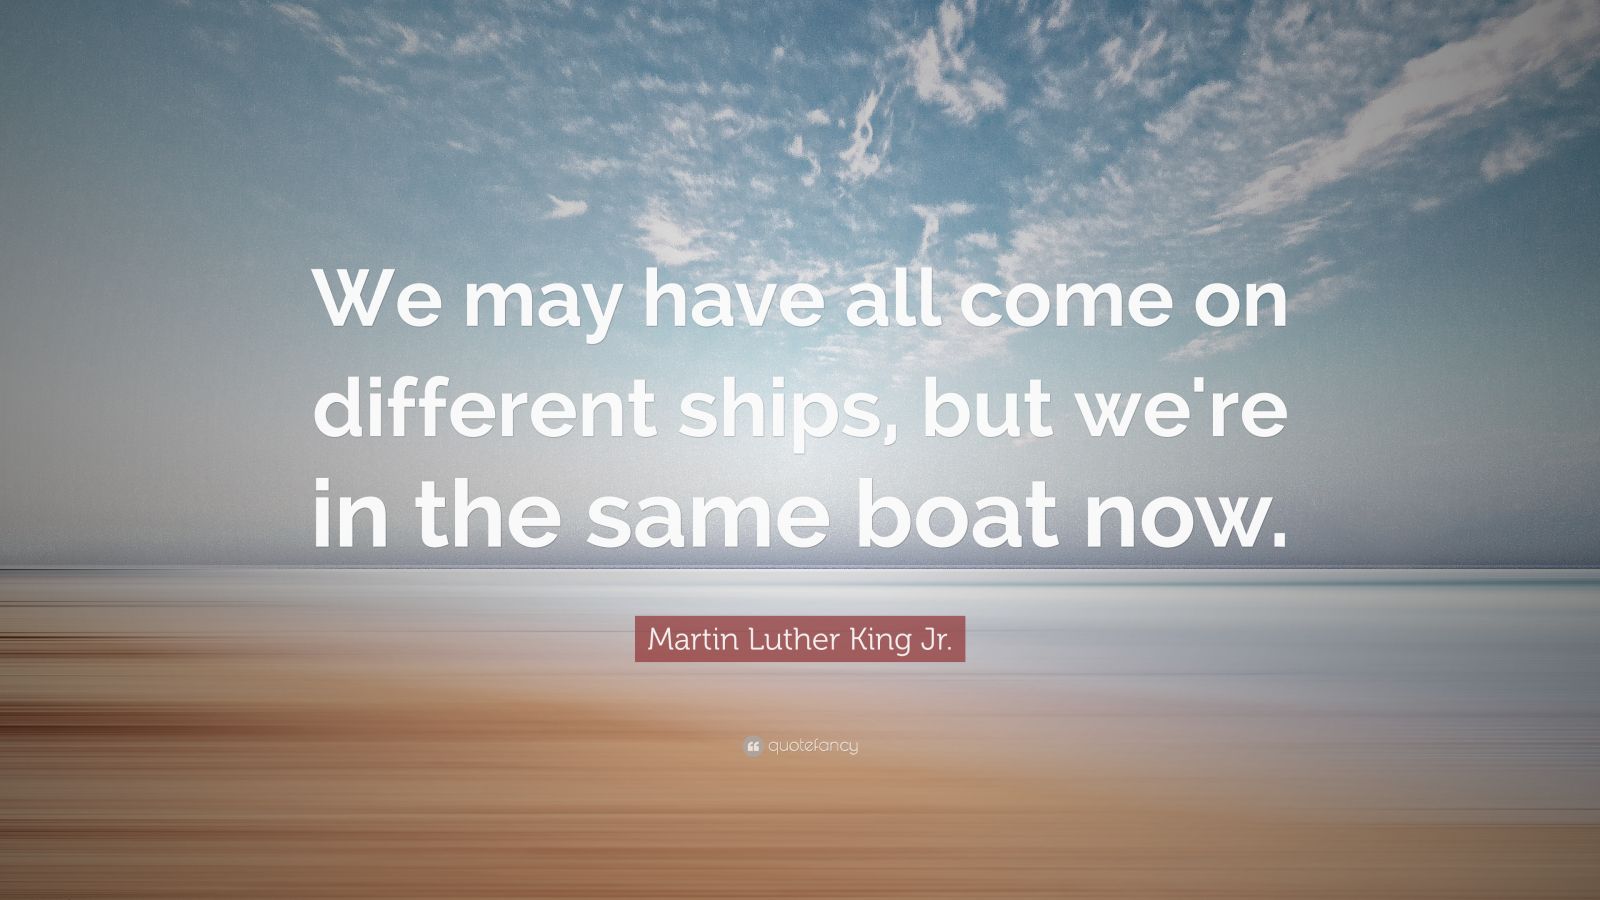 Martin Luther King Jr. Quote: “We may have all come on different ships, but we're in ...1600 x 900